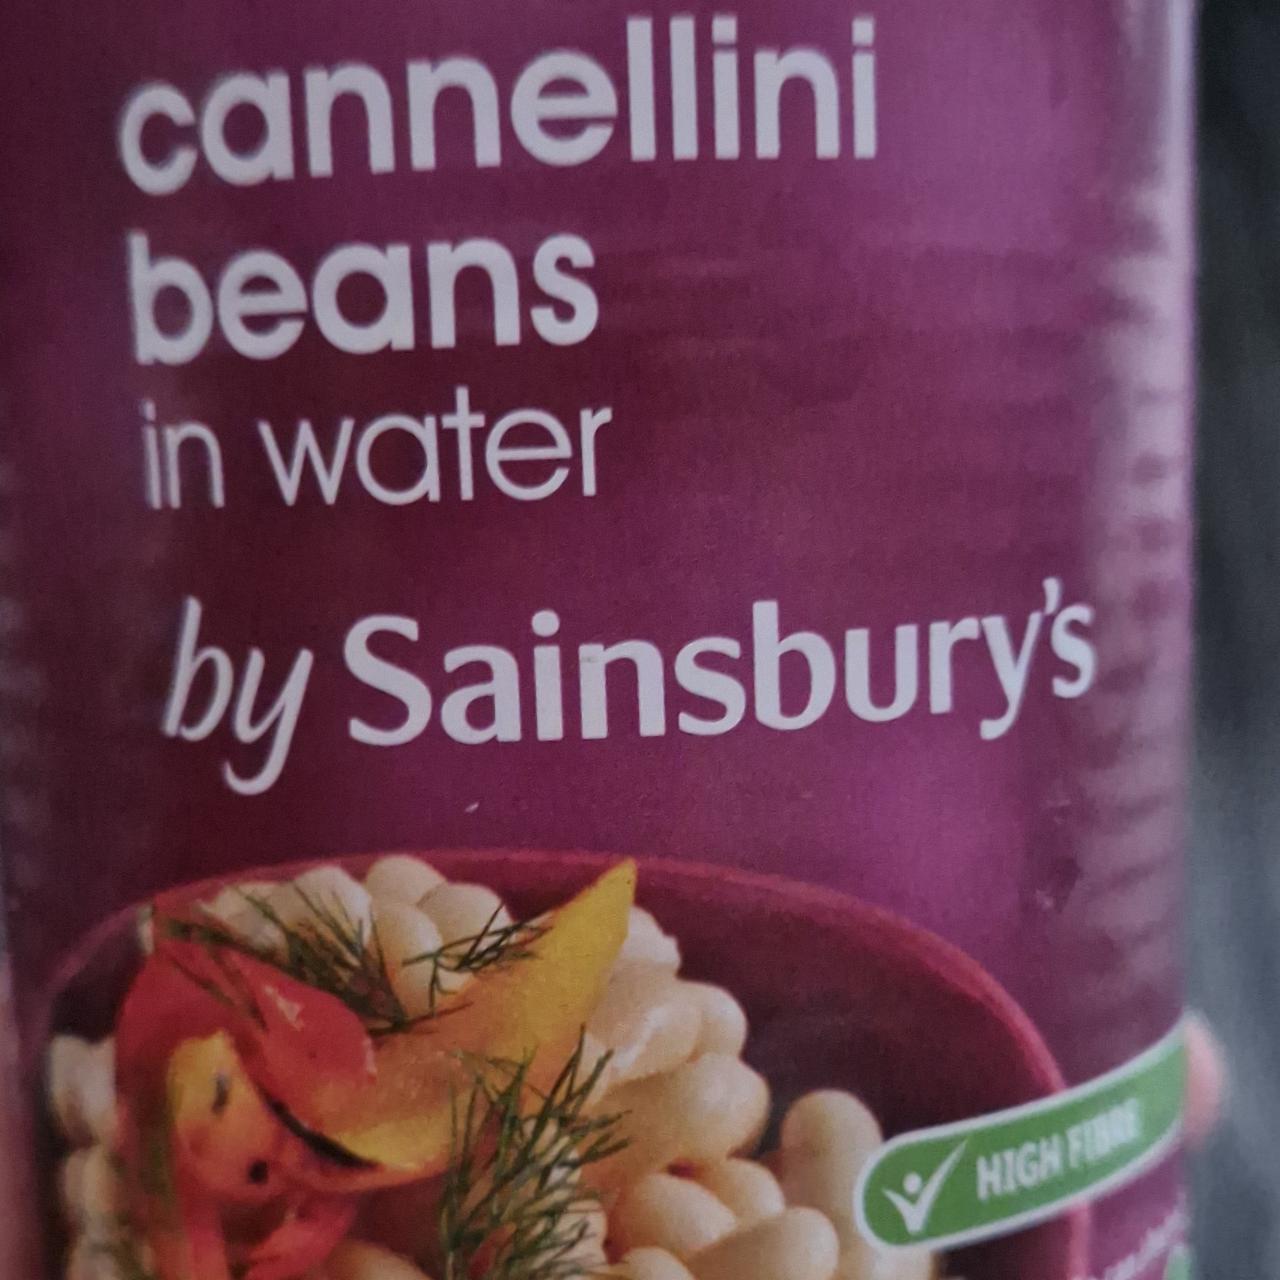 Fotografie - Cannellini beans in water by Sainsbury's